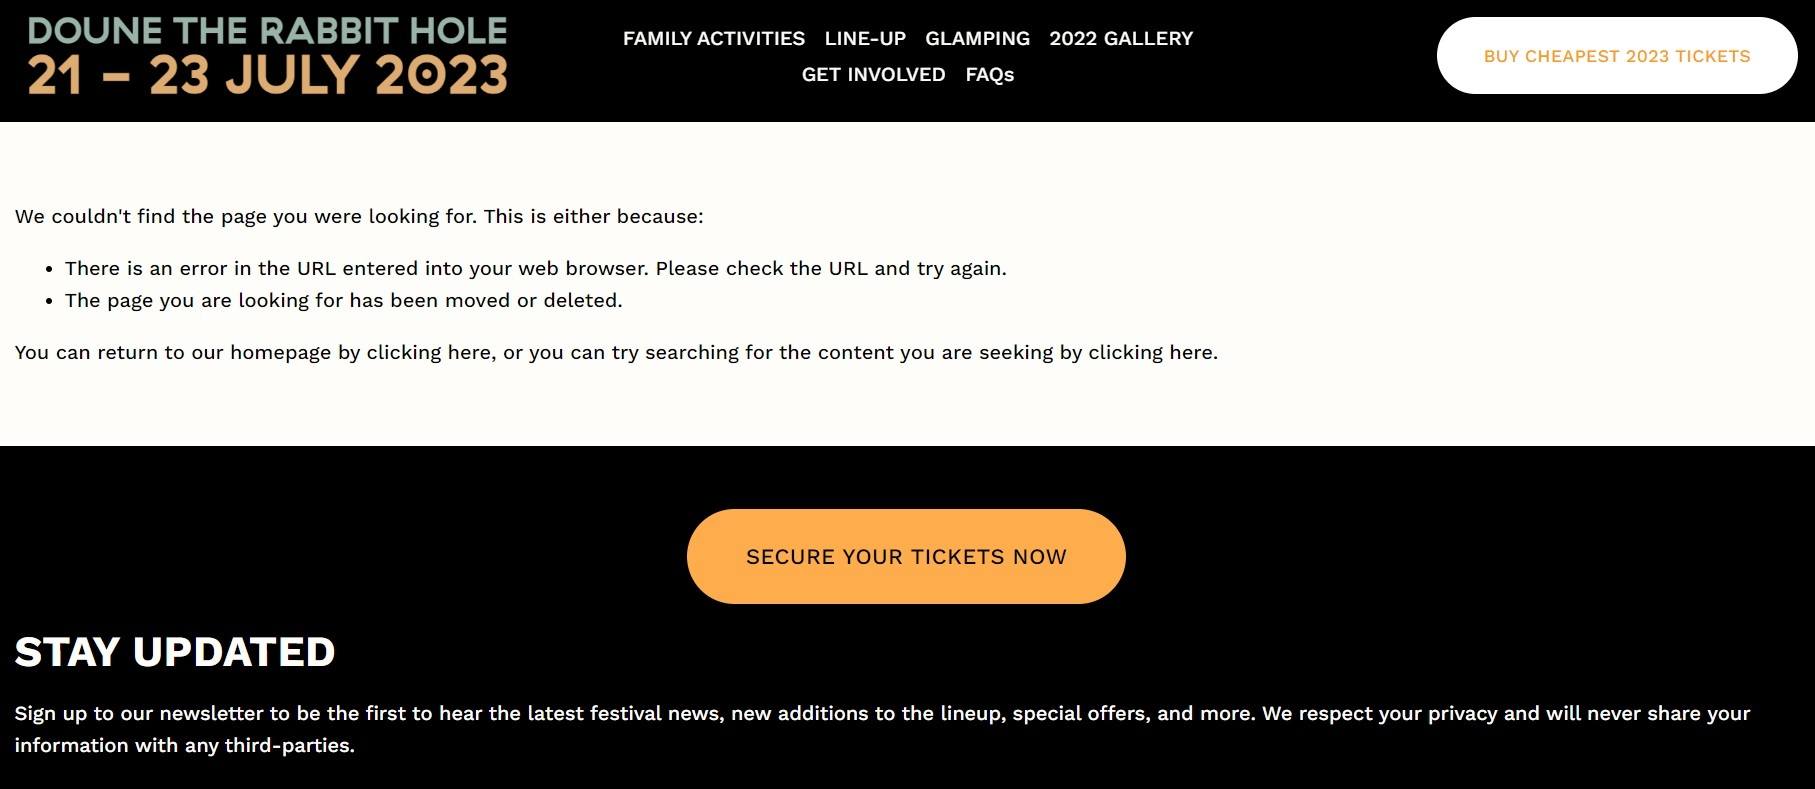 On Tuesday night the option to buy tickets from the festival’s website appeared to fail.